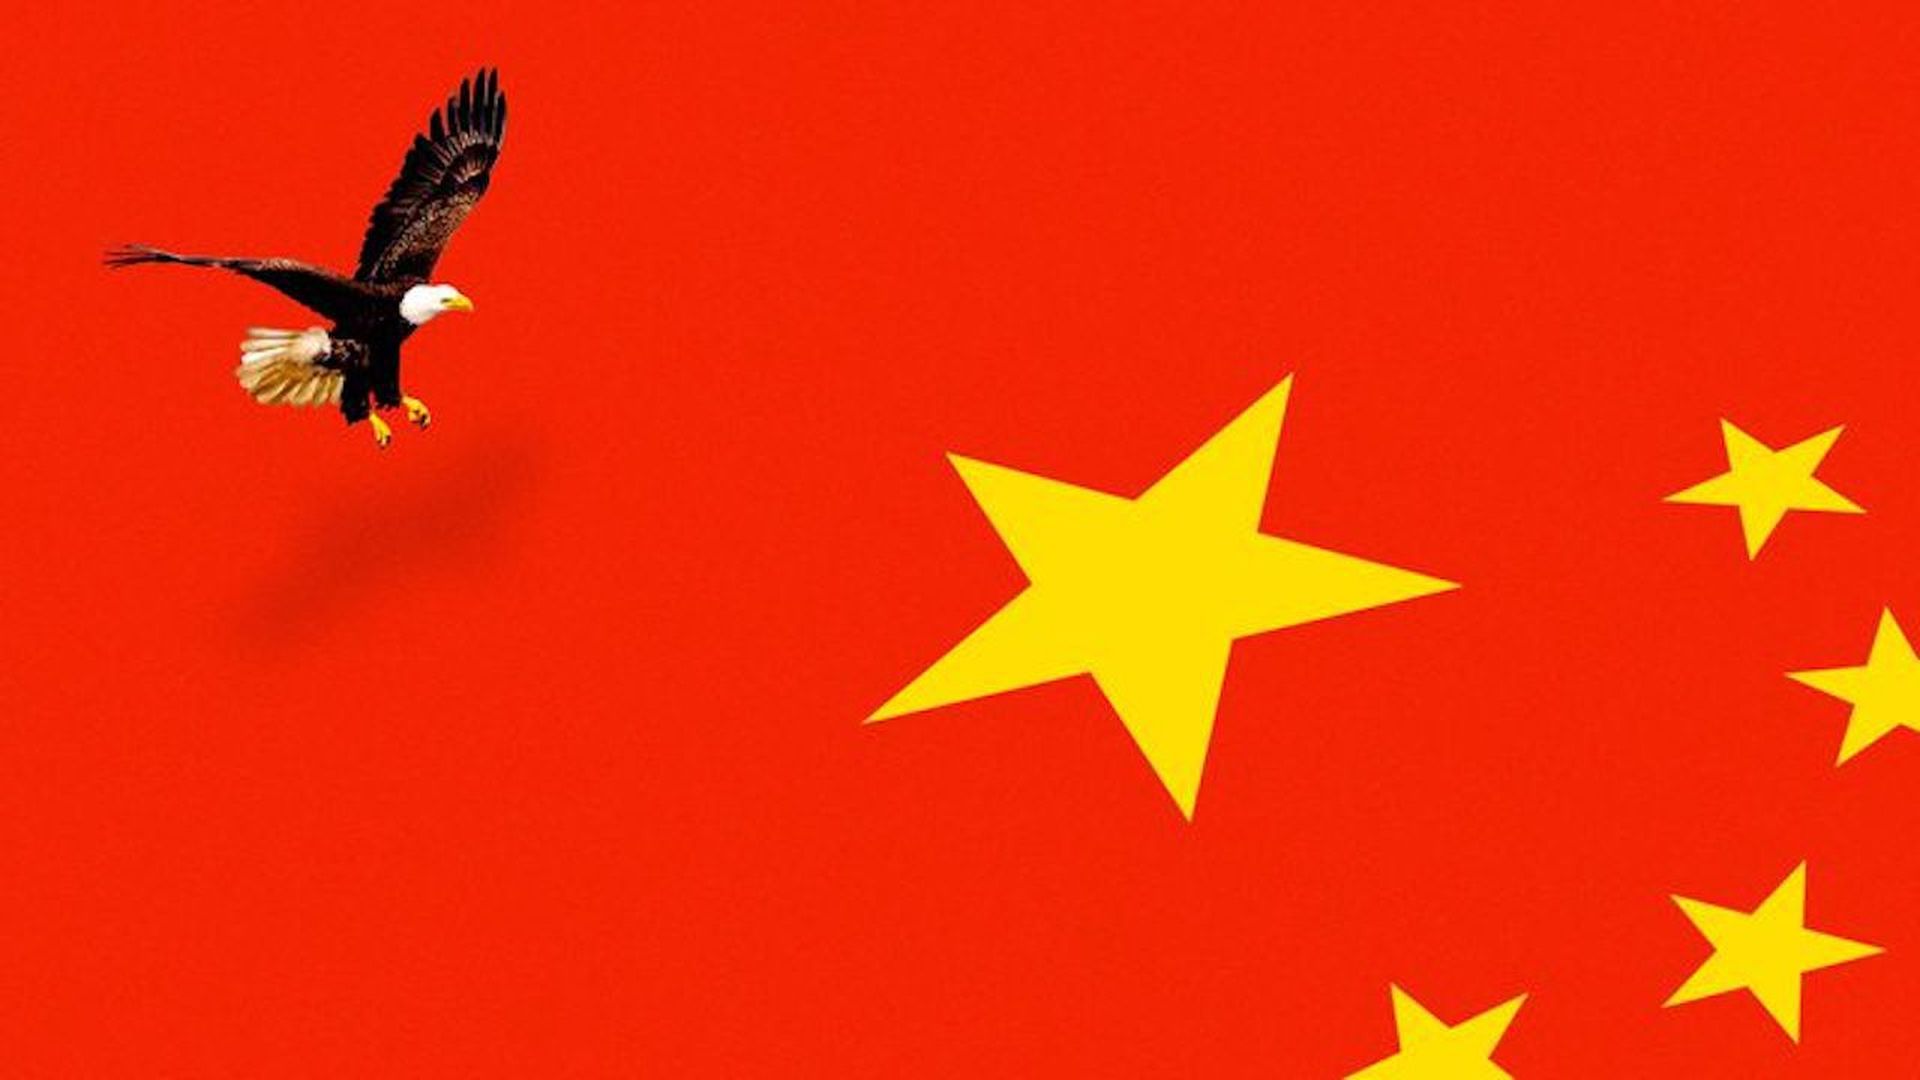 Illustration of an eagle flying over the flag of China.